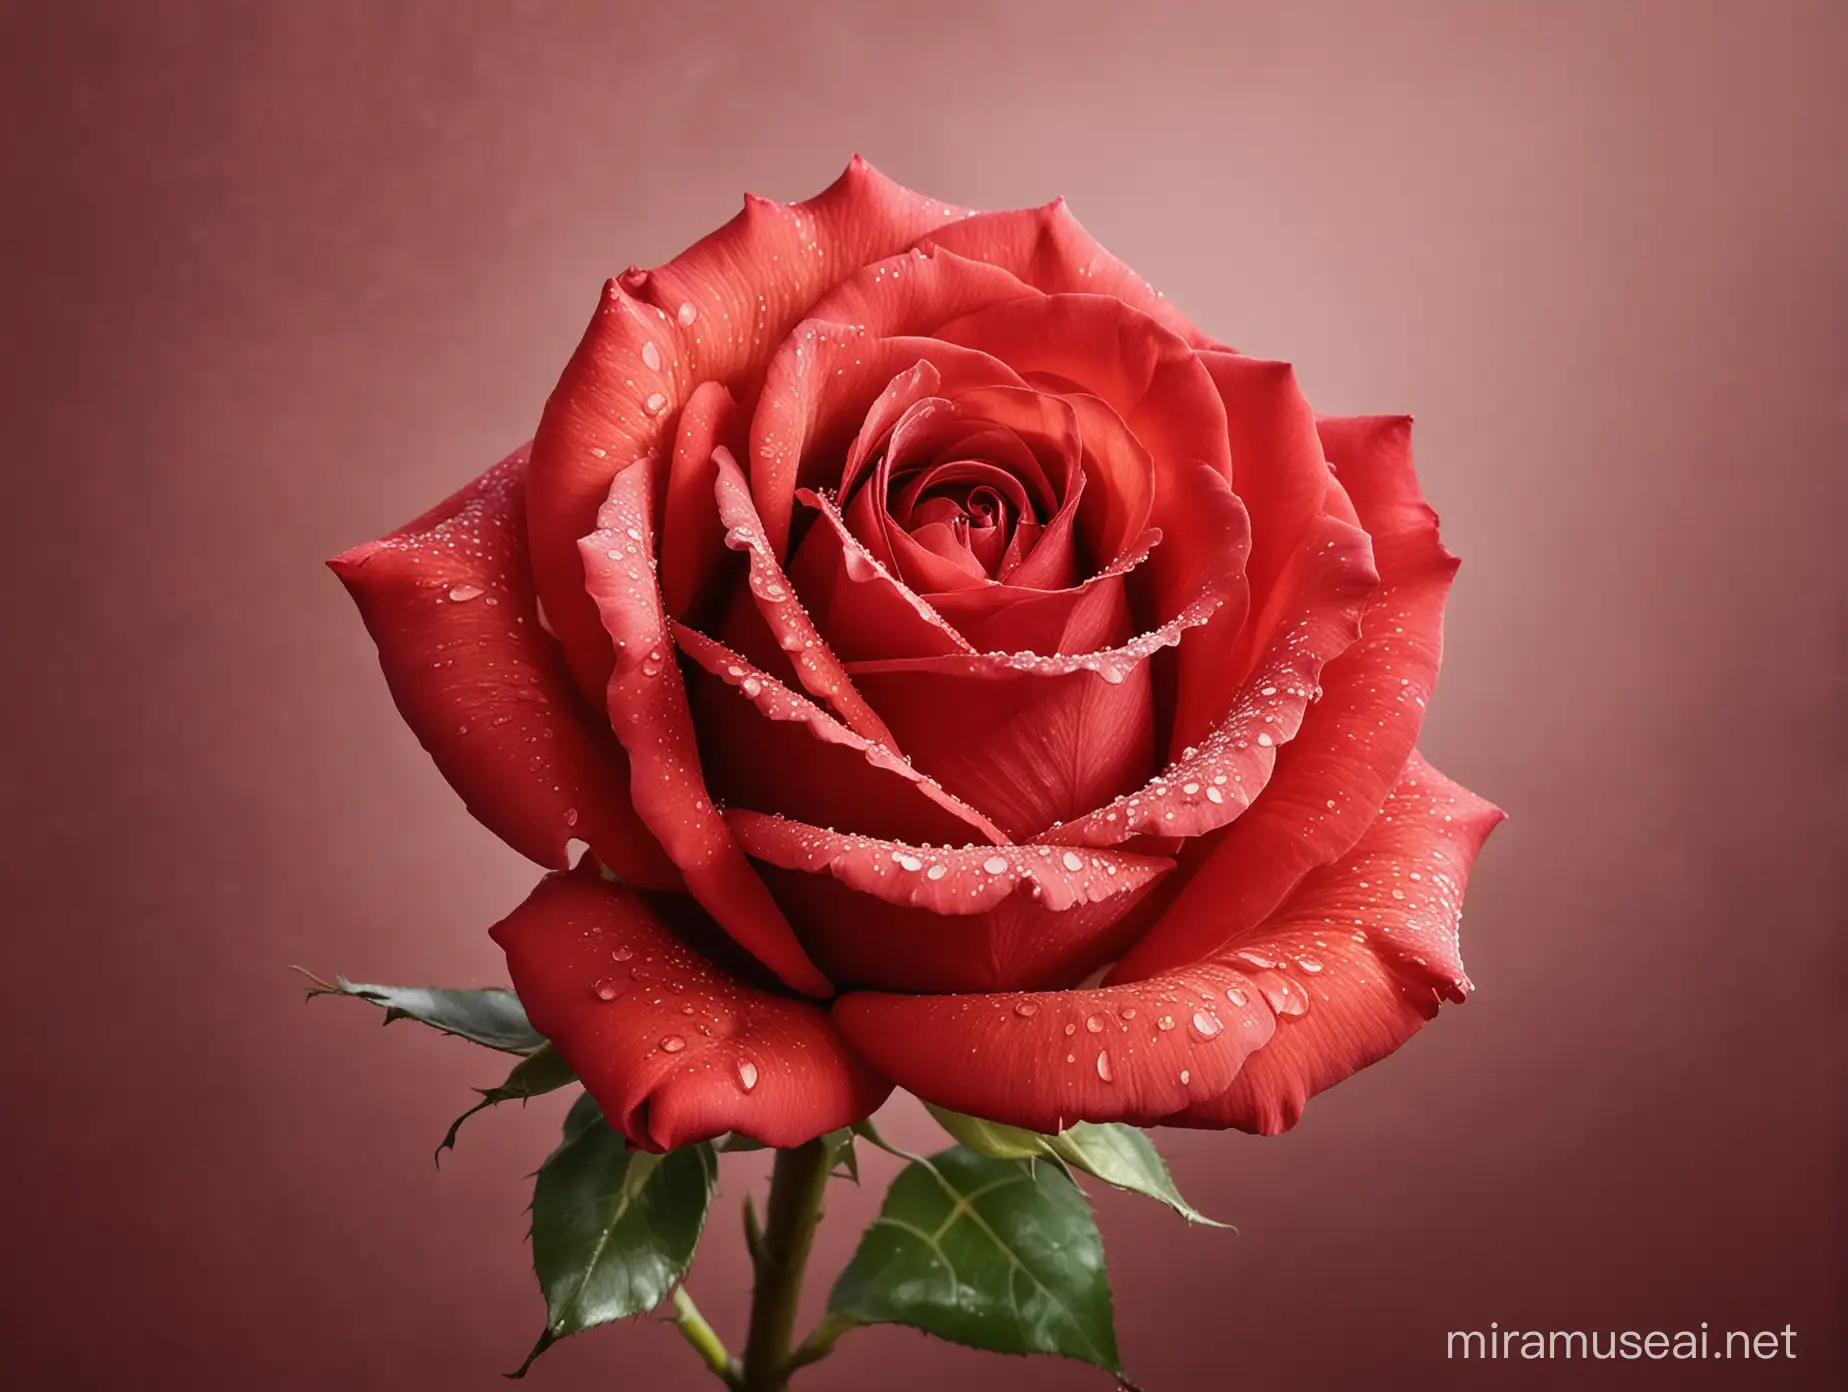 Captivating Red Rose Vibrant Symbol of Love and Romance